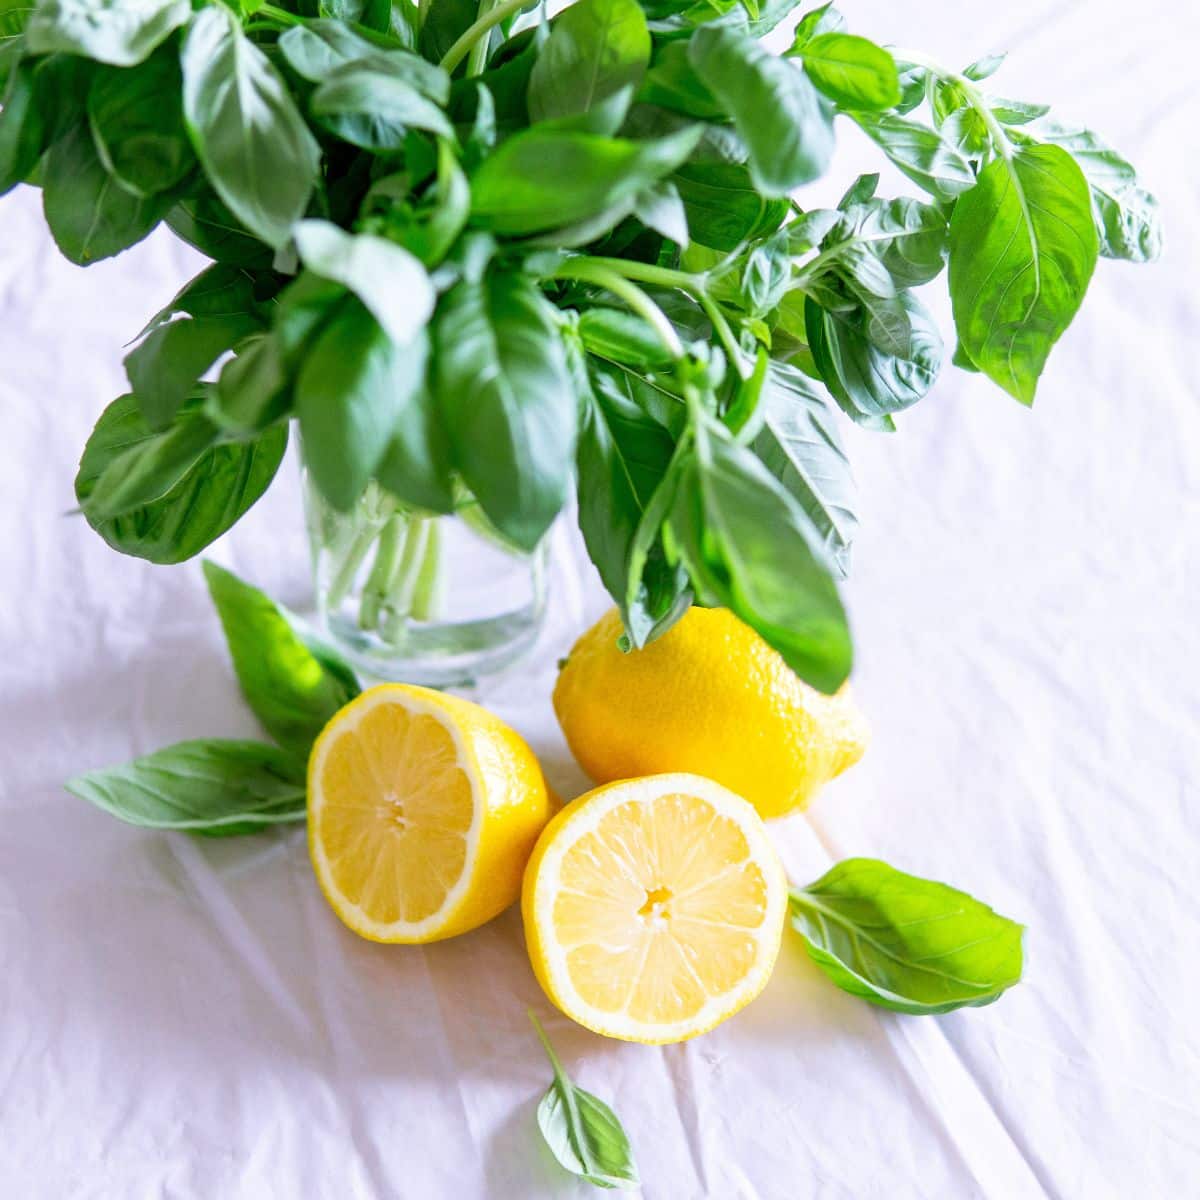 Lemon with basil in the background